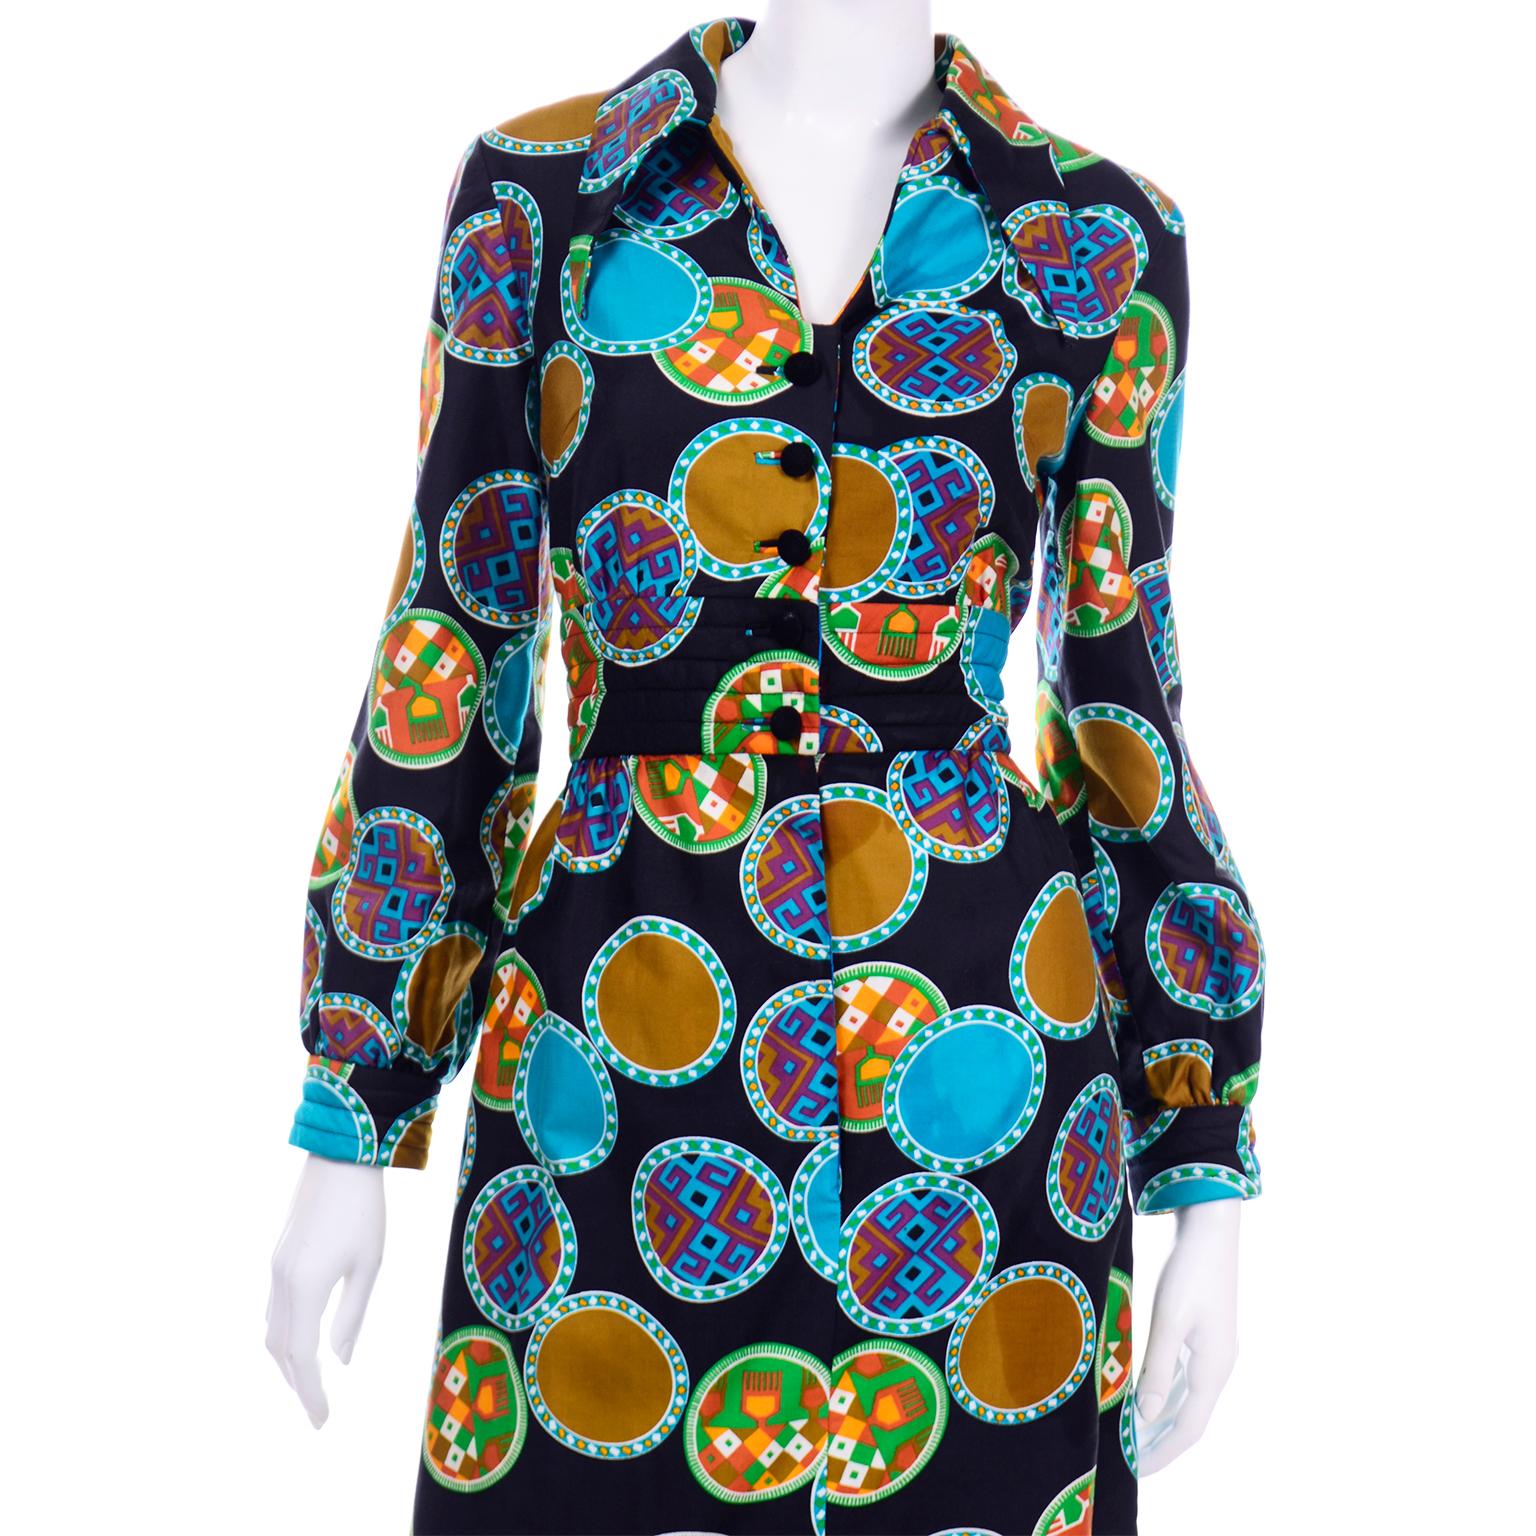 Women's Vintage Dynasty Cotton Maxi Dress in Colorful Medallion Print With Pockets